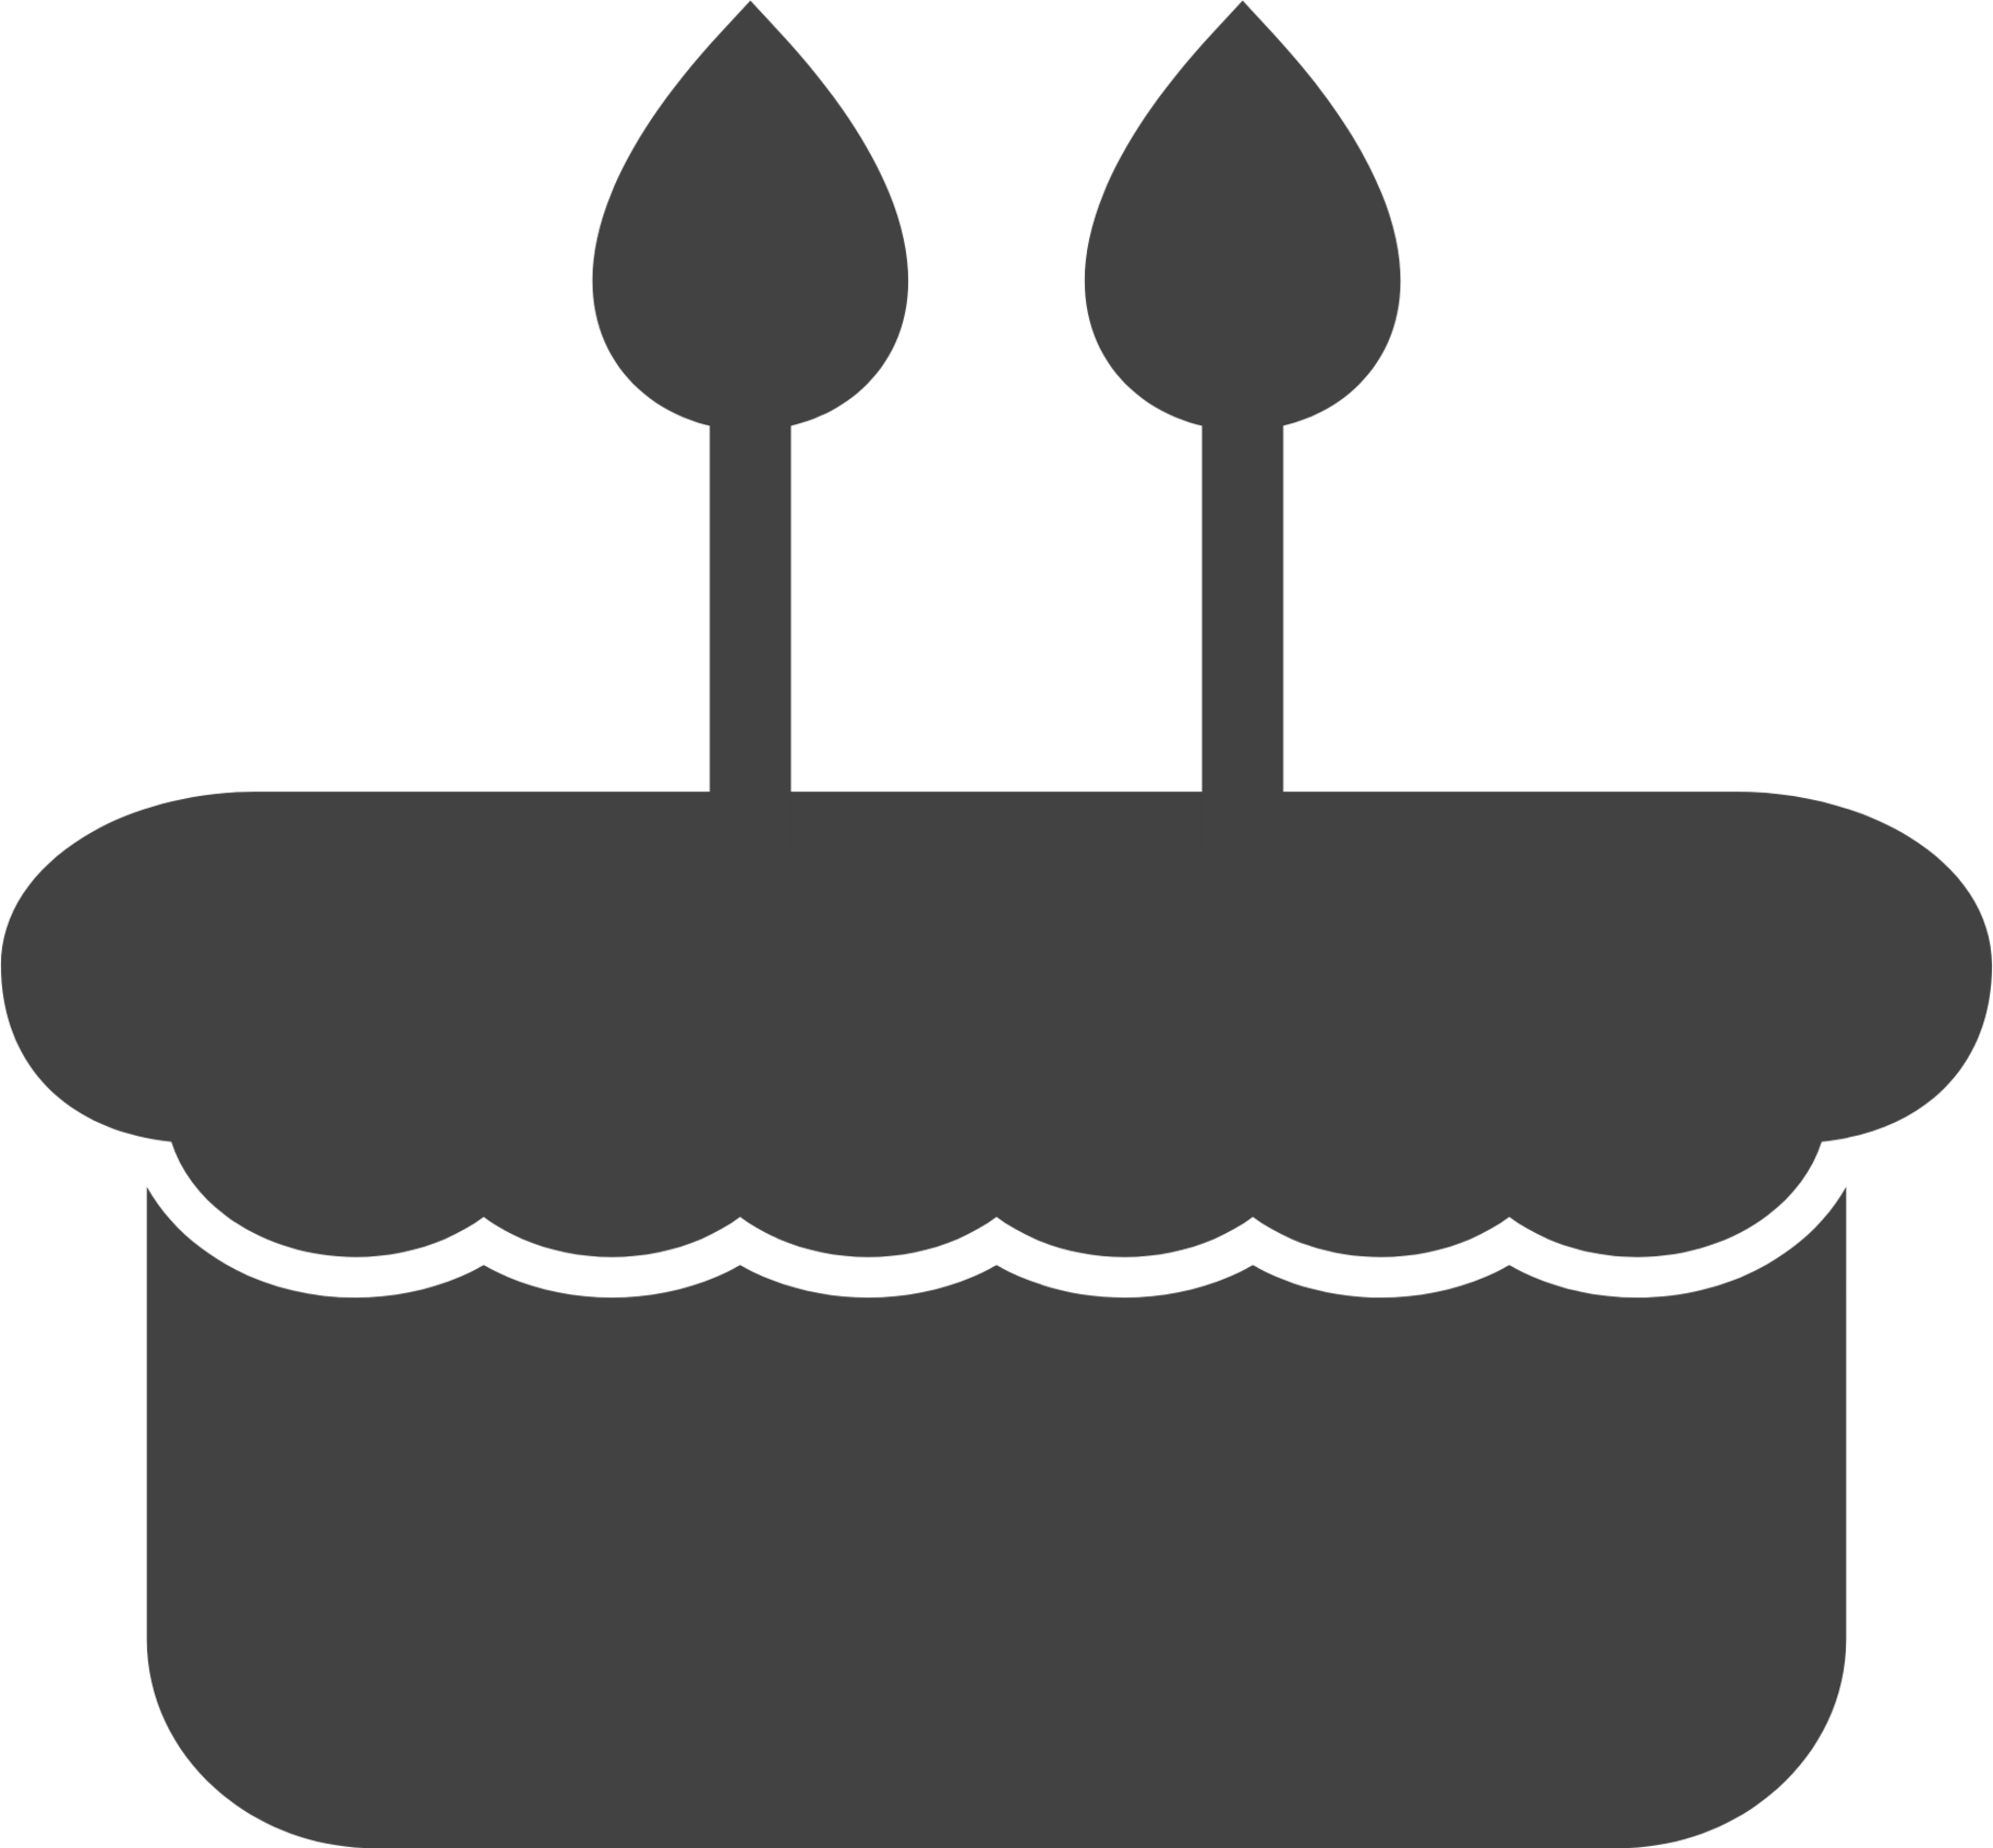 birthday cake icon png